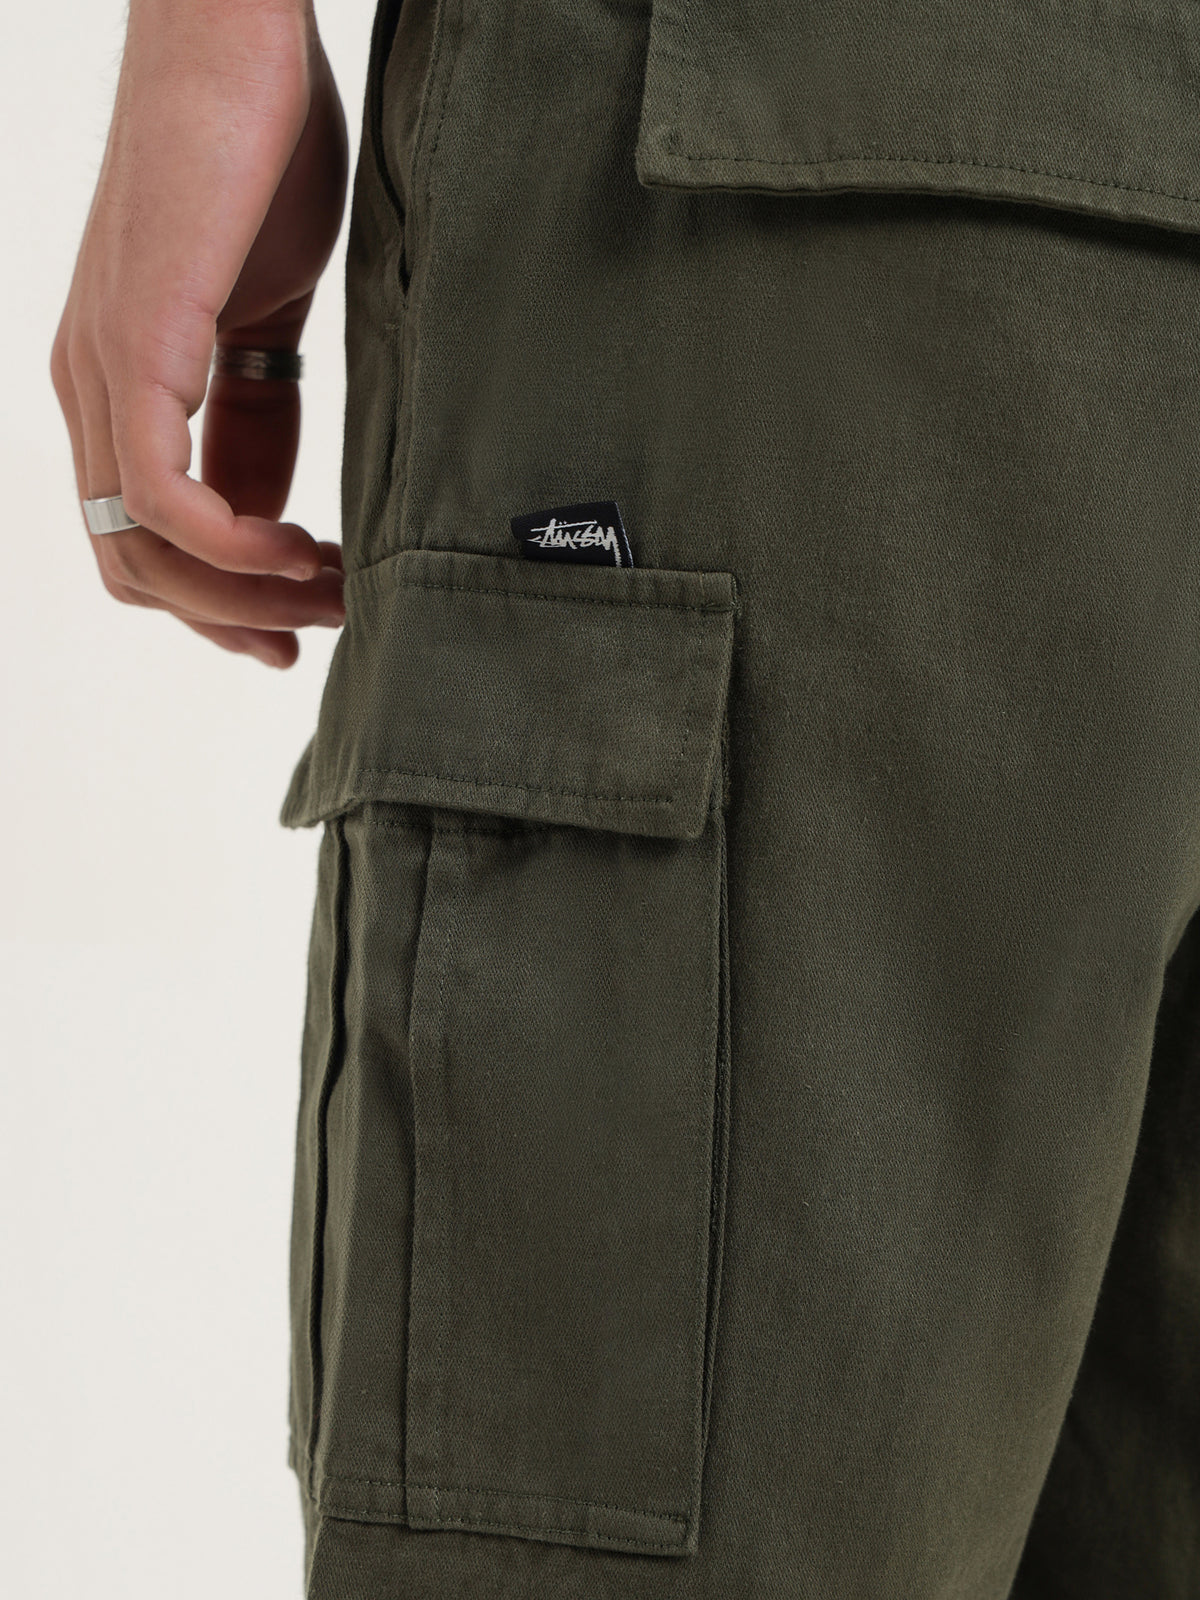 Surplus Cargo Shorts in Military Green